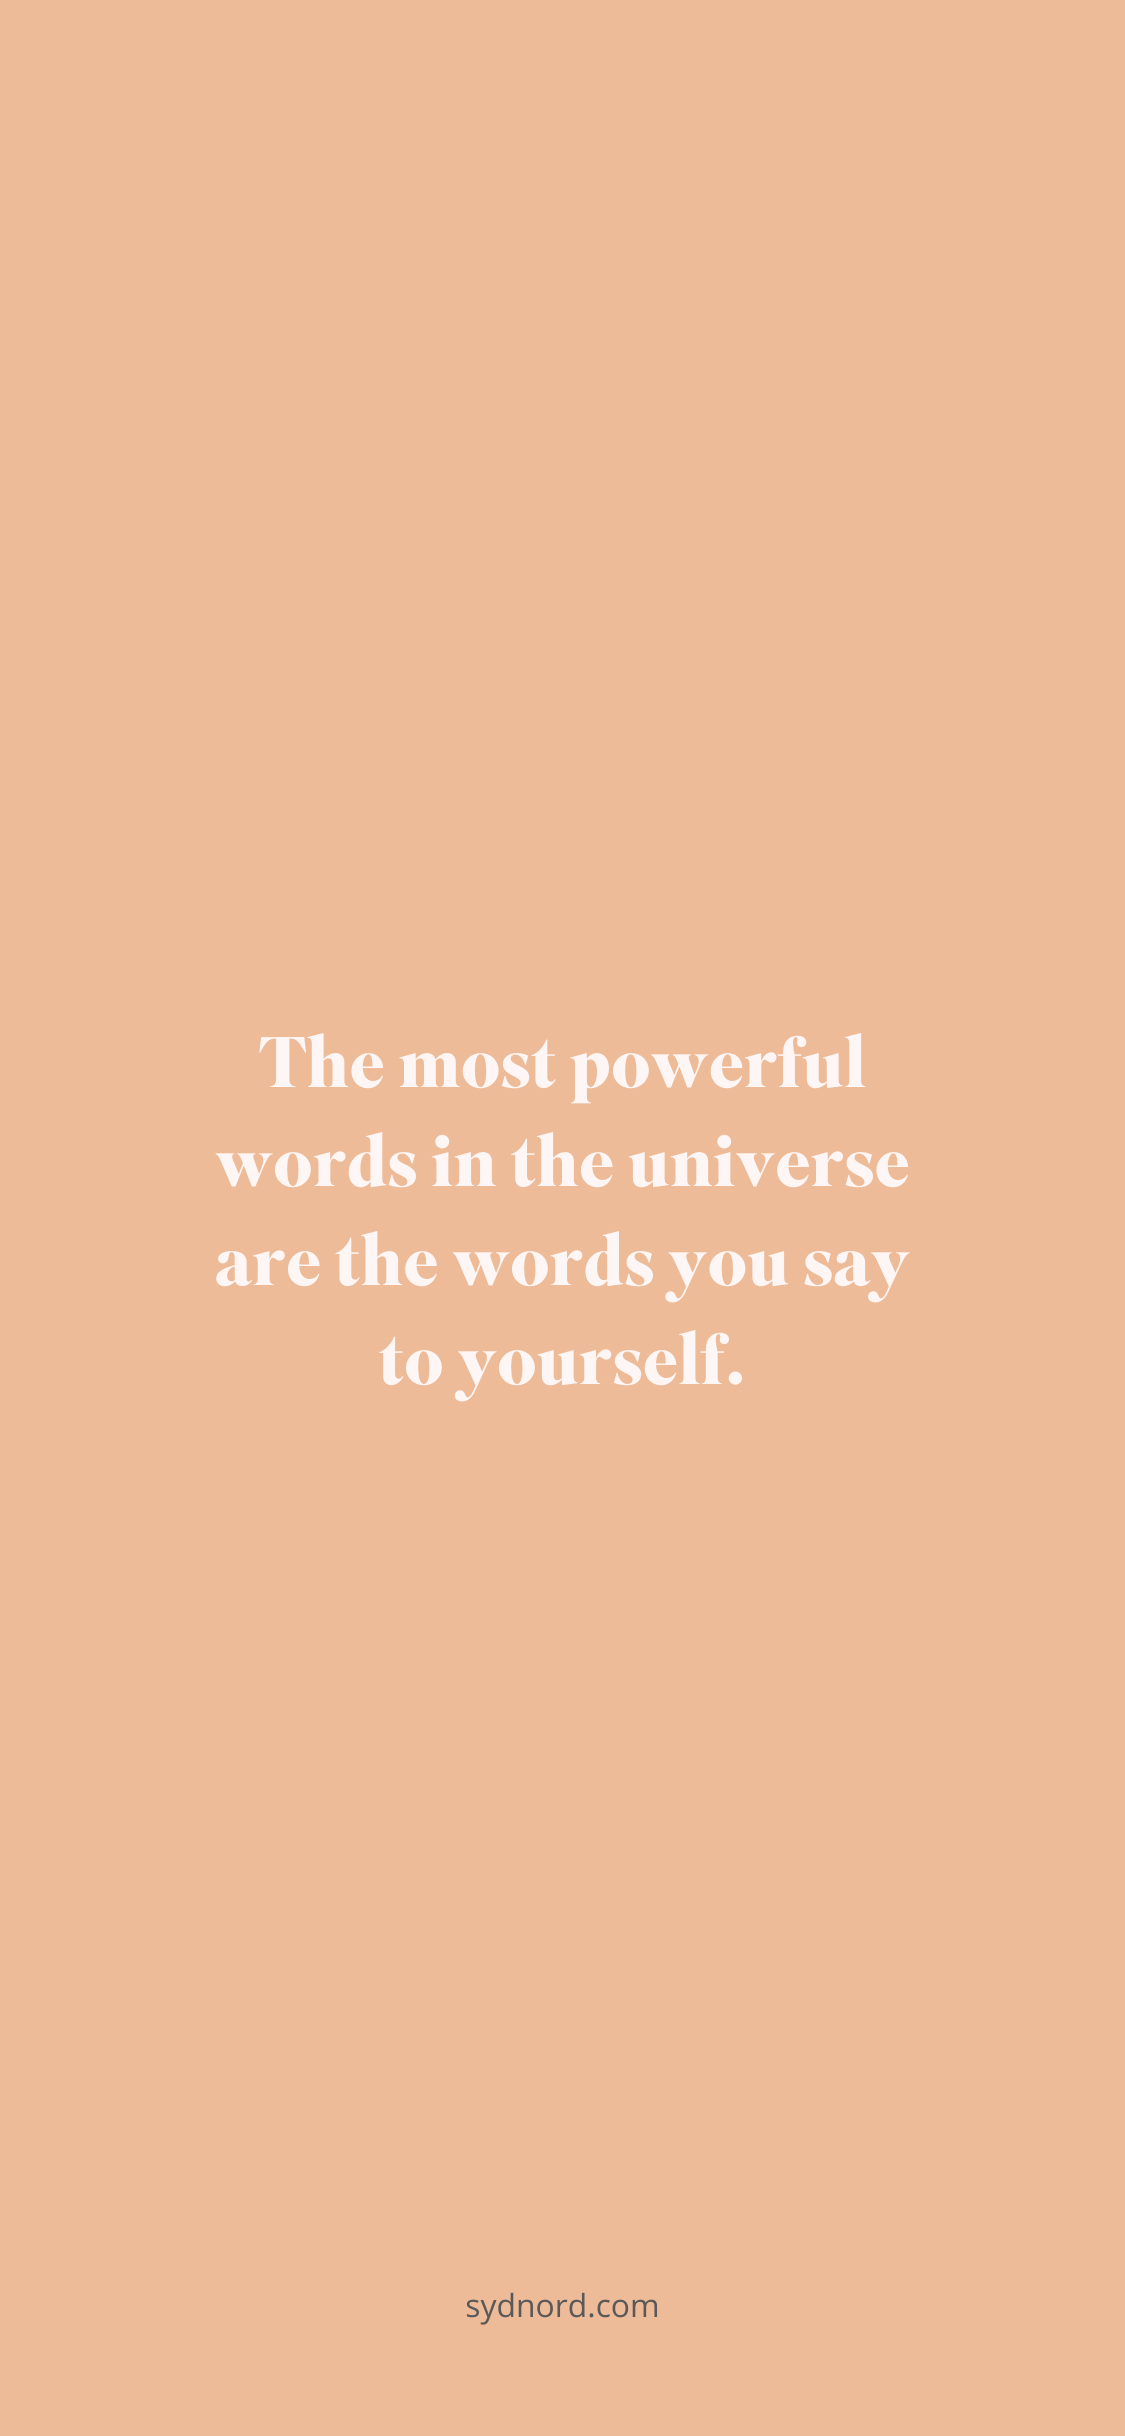 Best positive quotes: The most powerful words in the universe are the words you say to yourself.